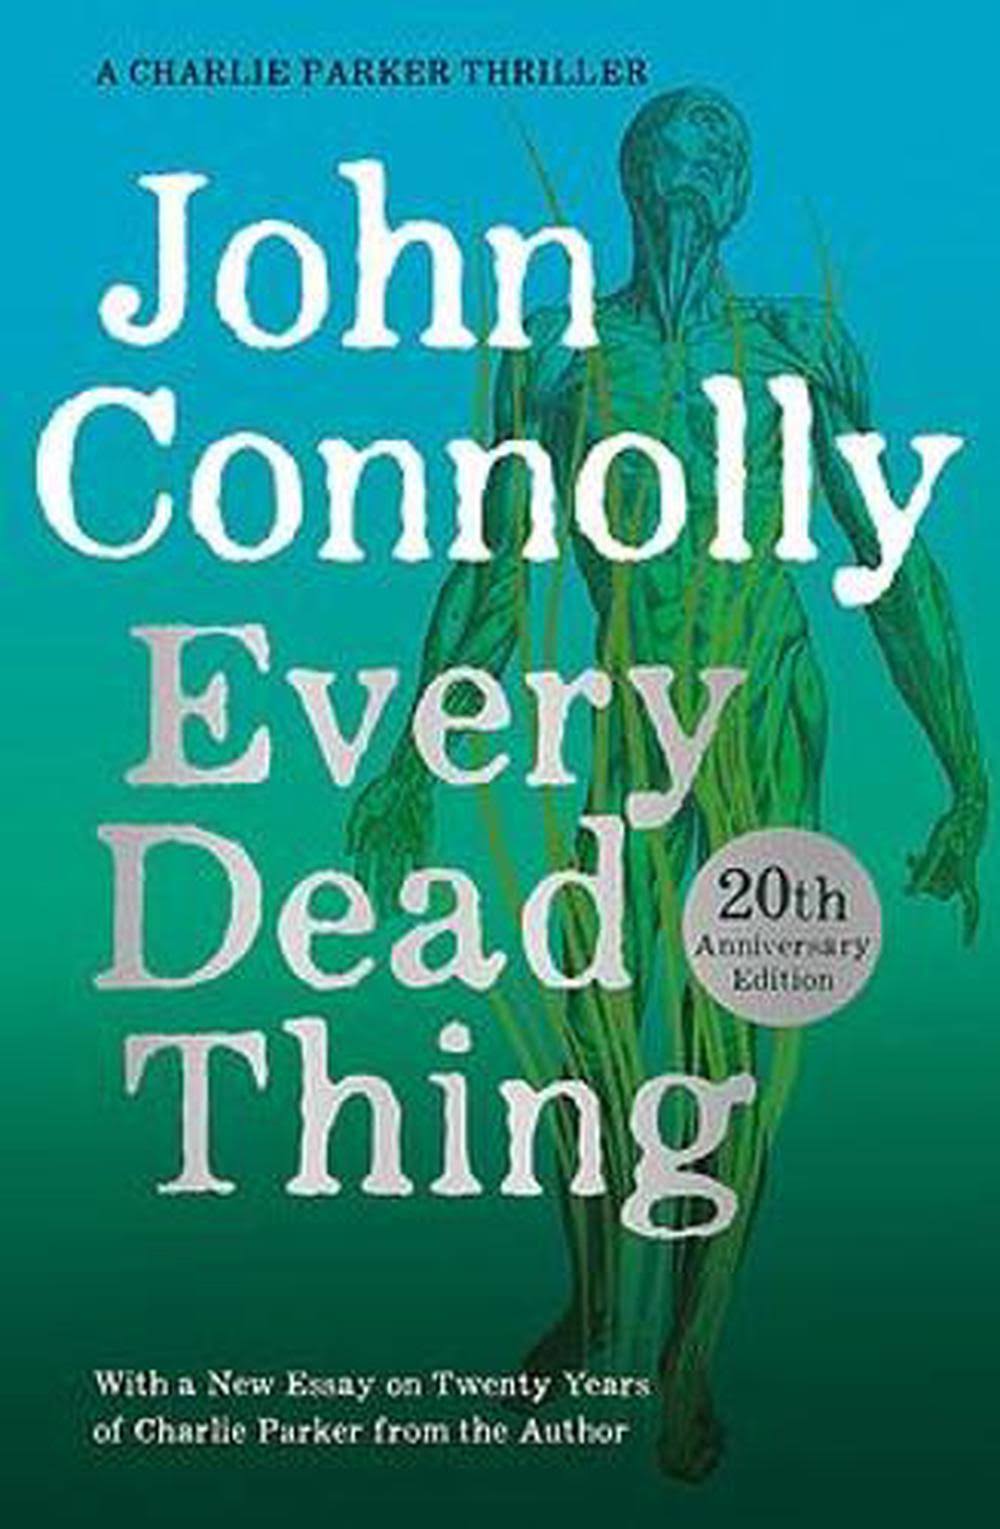 Every Dead Thing - John Connolly